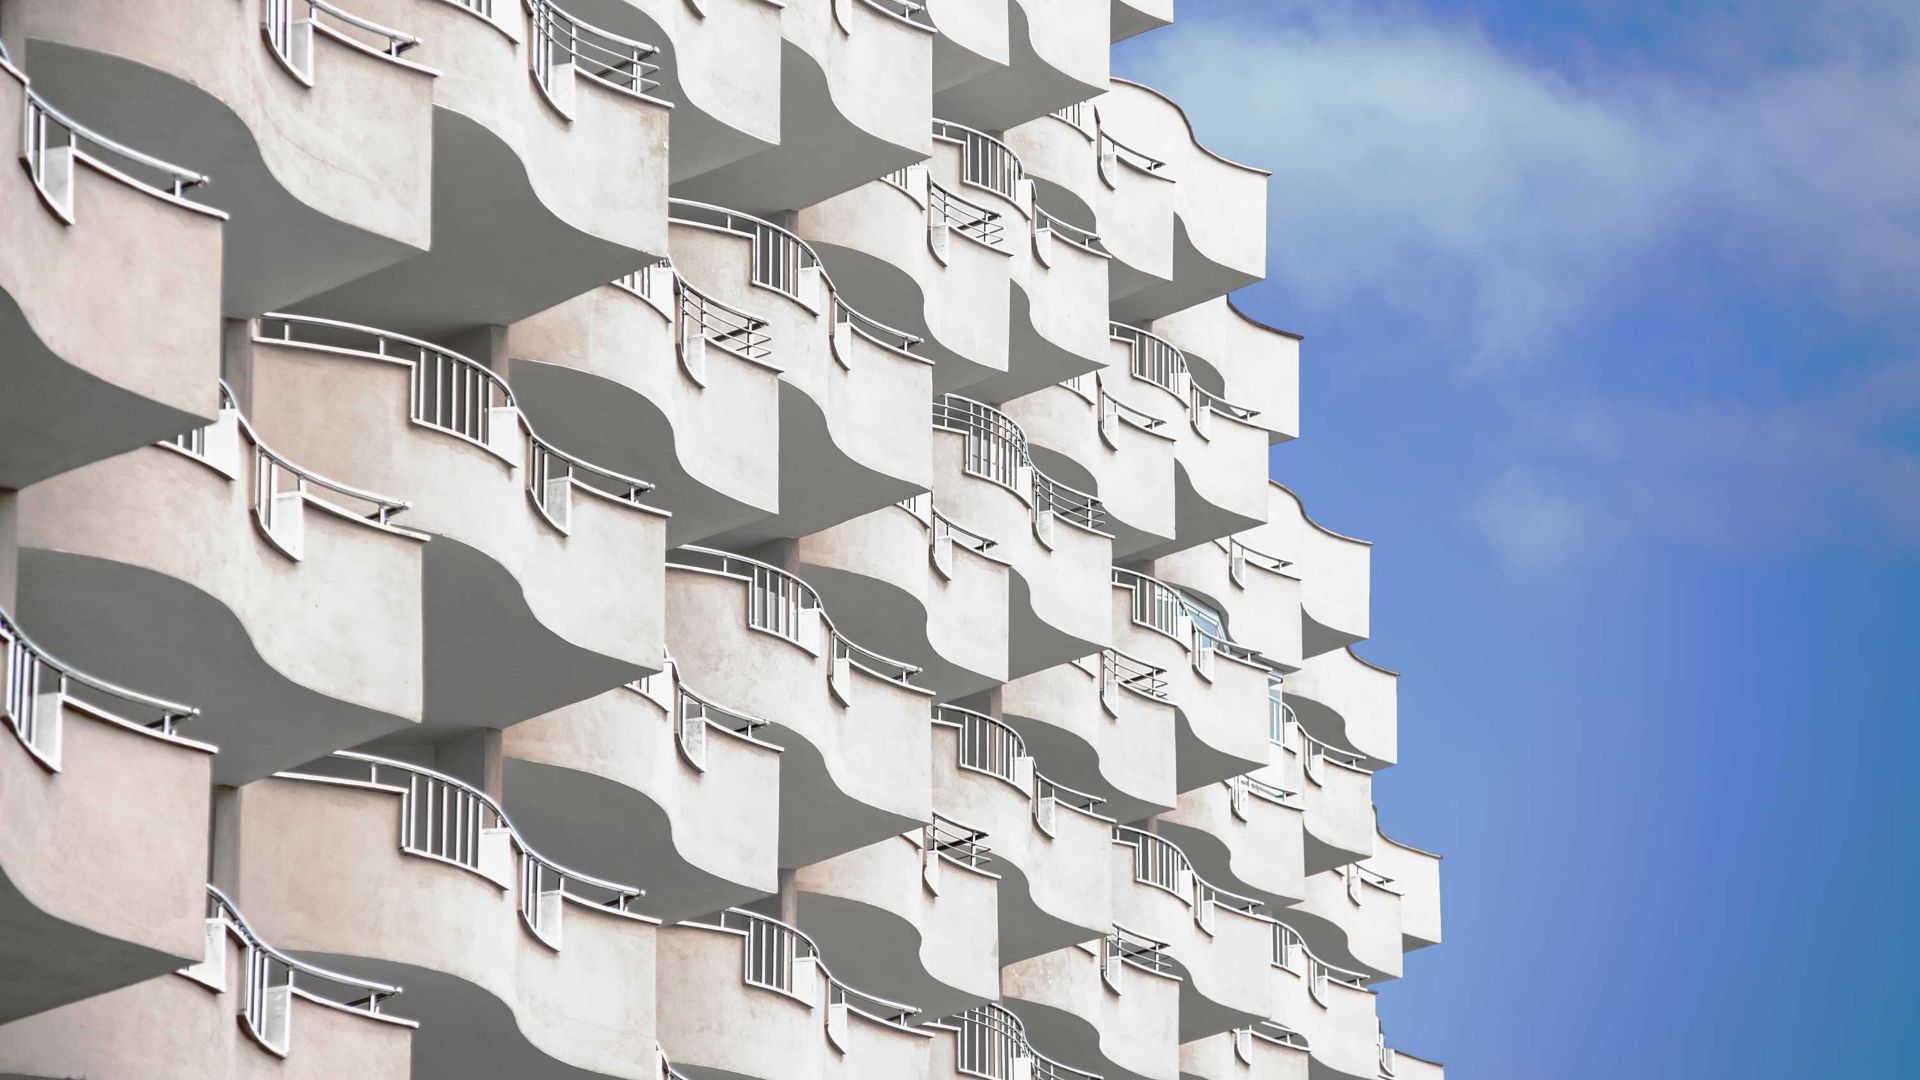 Upwards view of wave shaped balconies